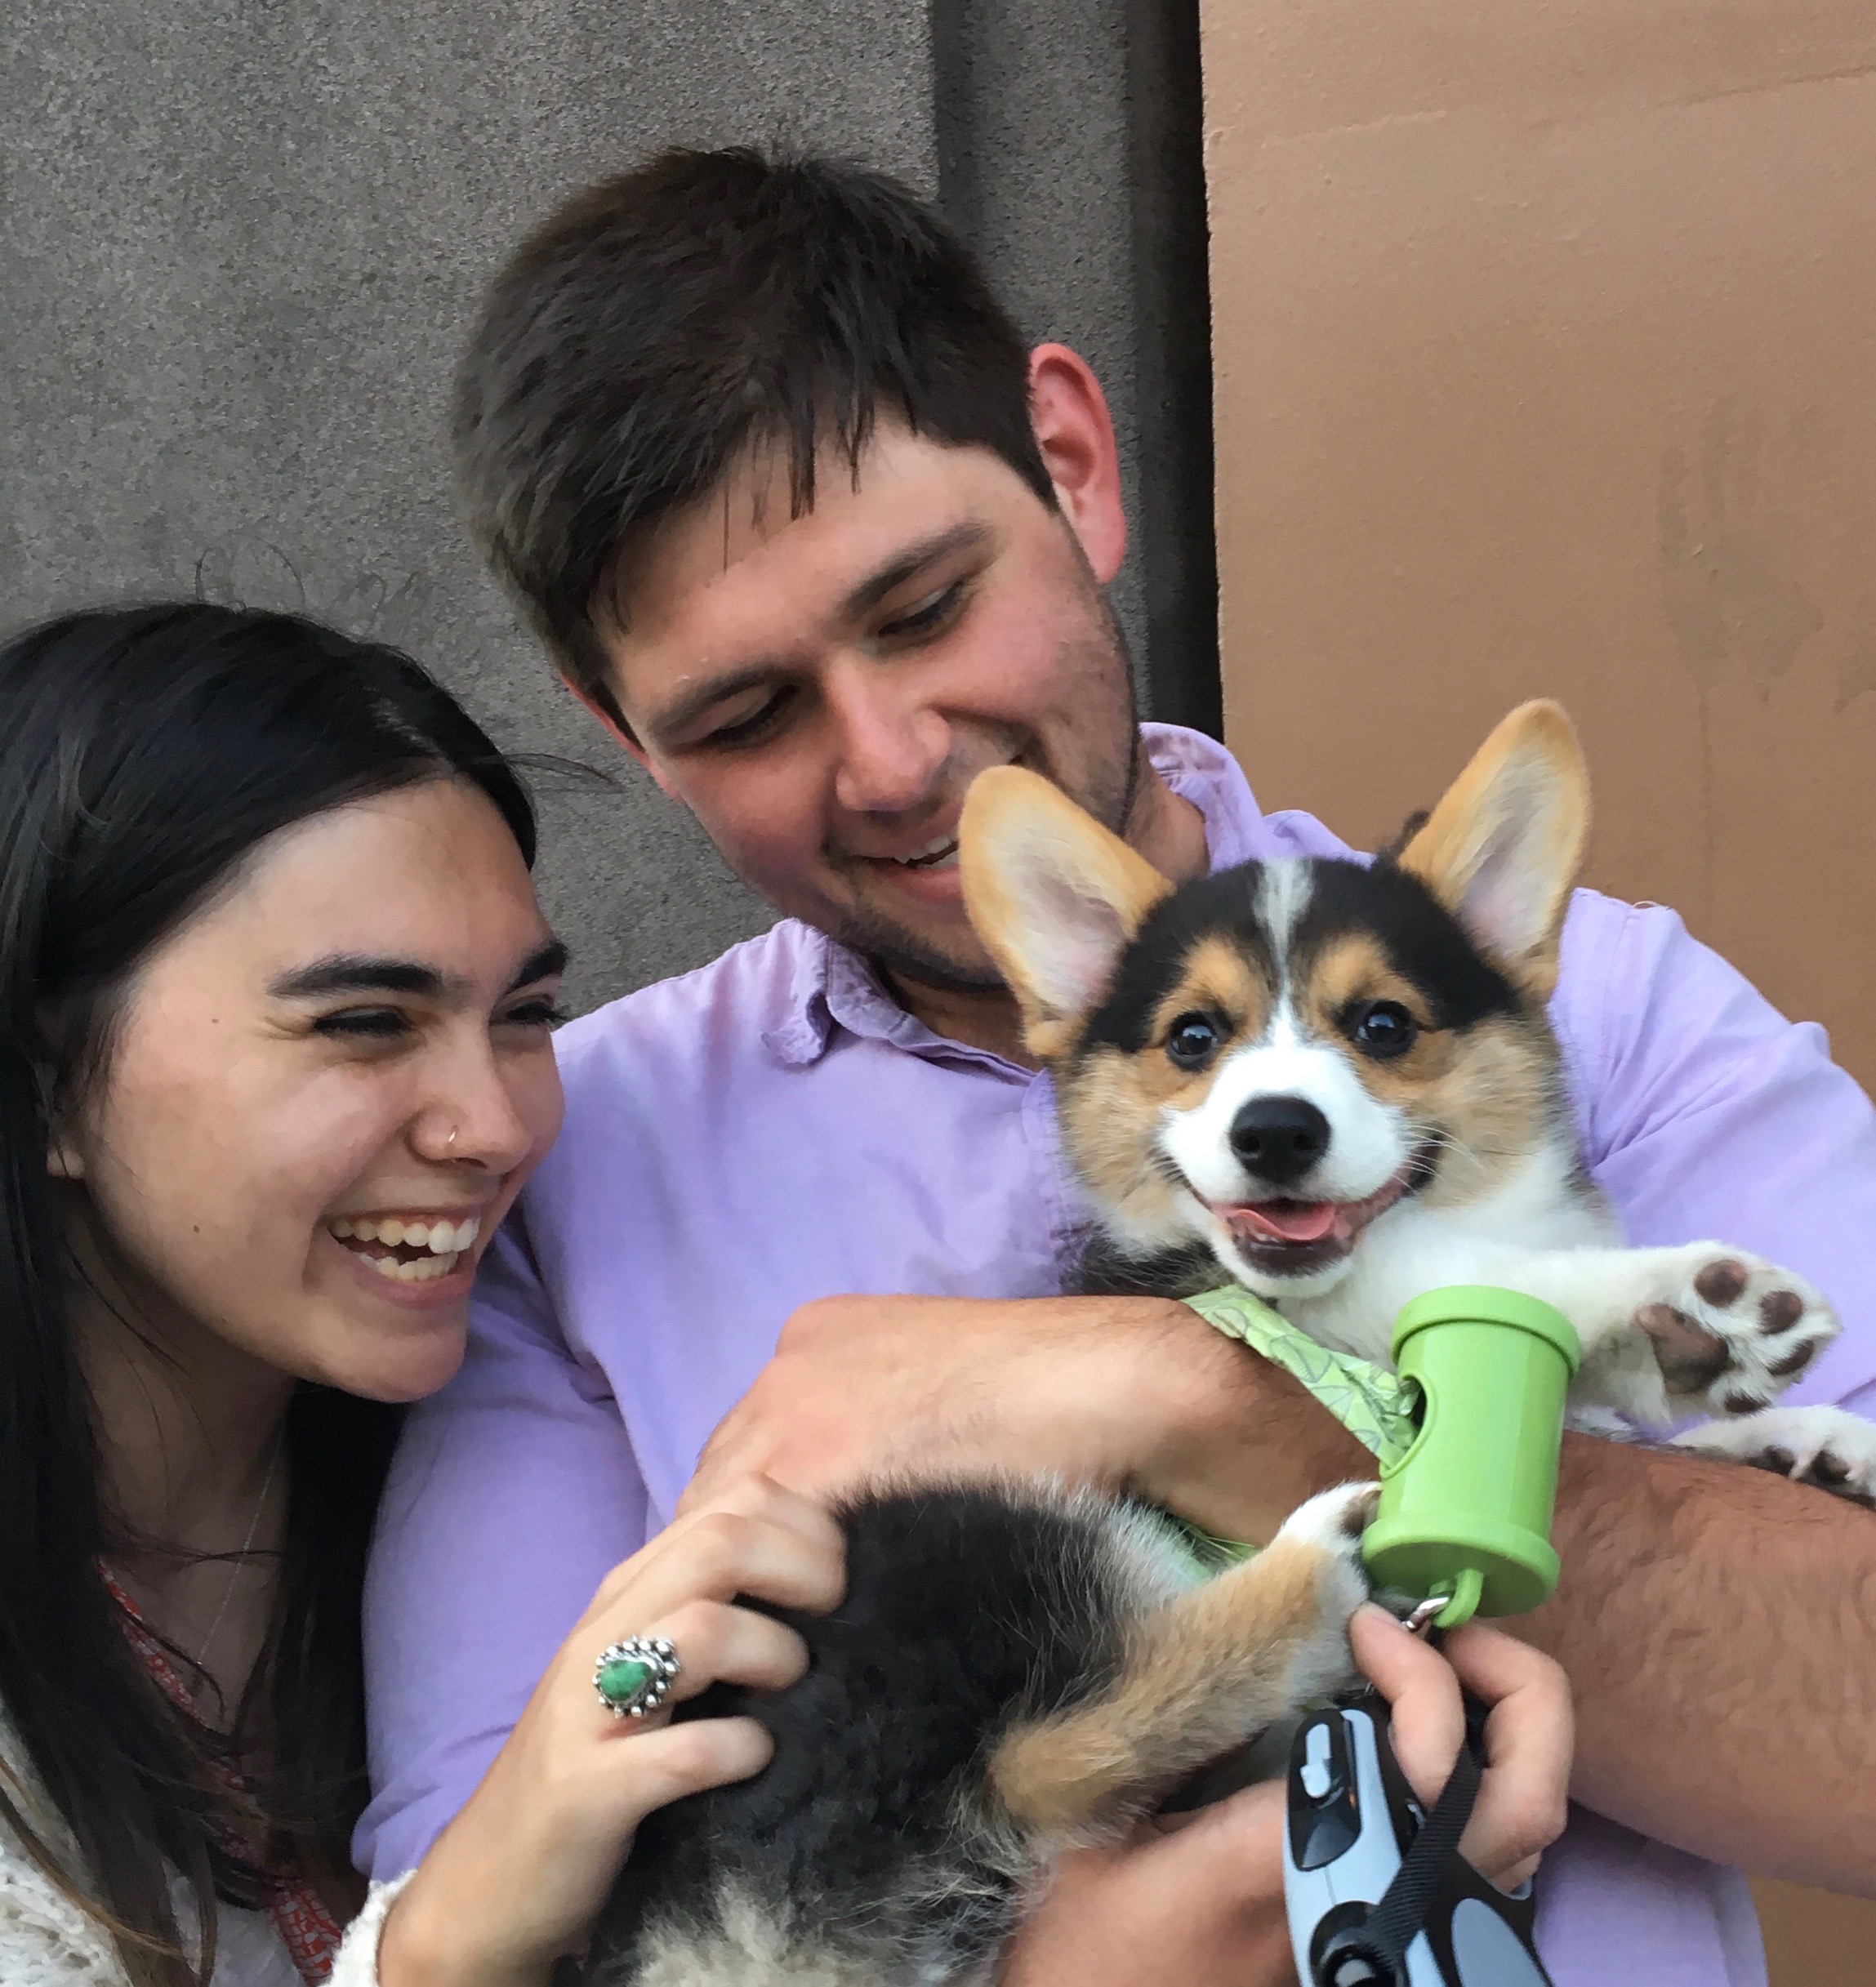 Man Holding Grinning Pembroke Corgi Puppy And Grinning While Woman Looks On And Grins Too